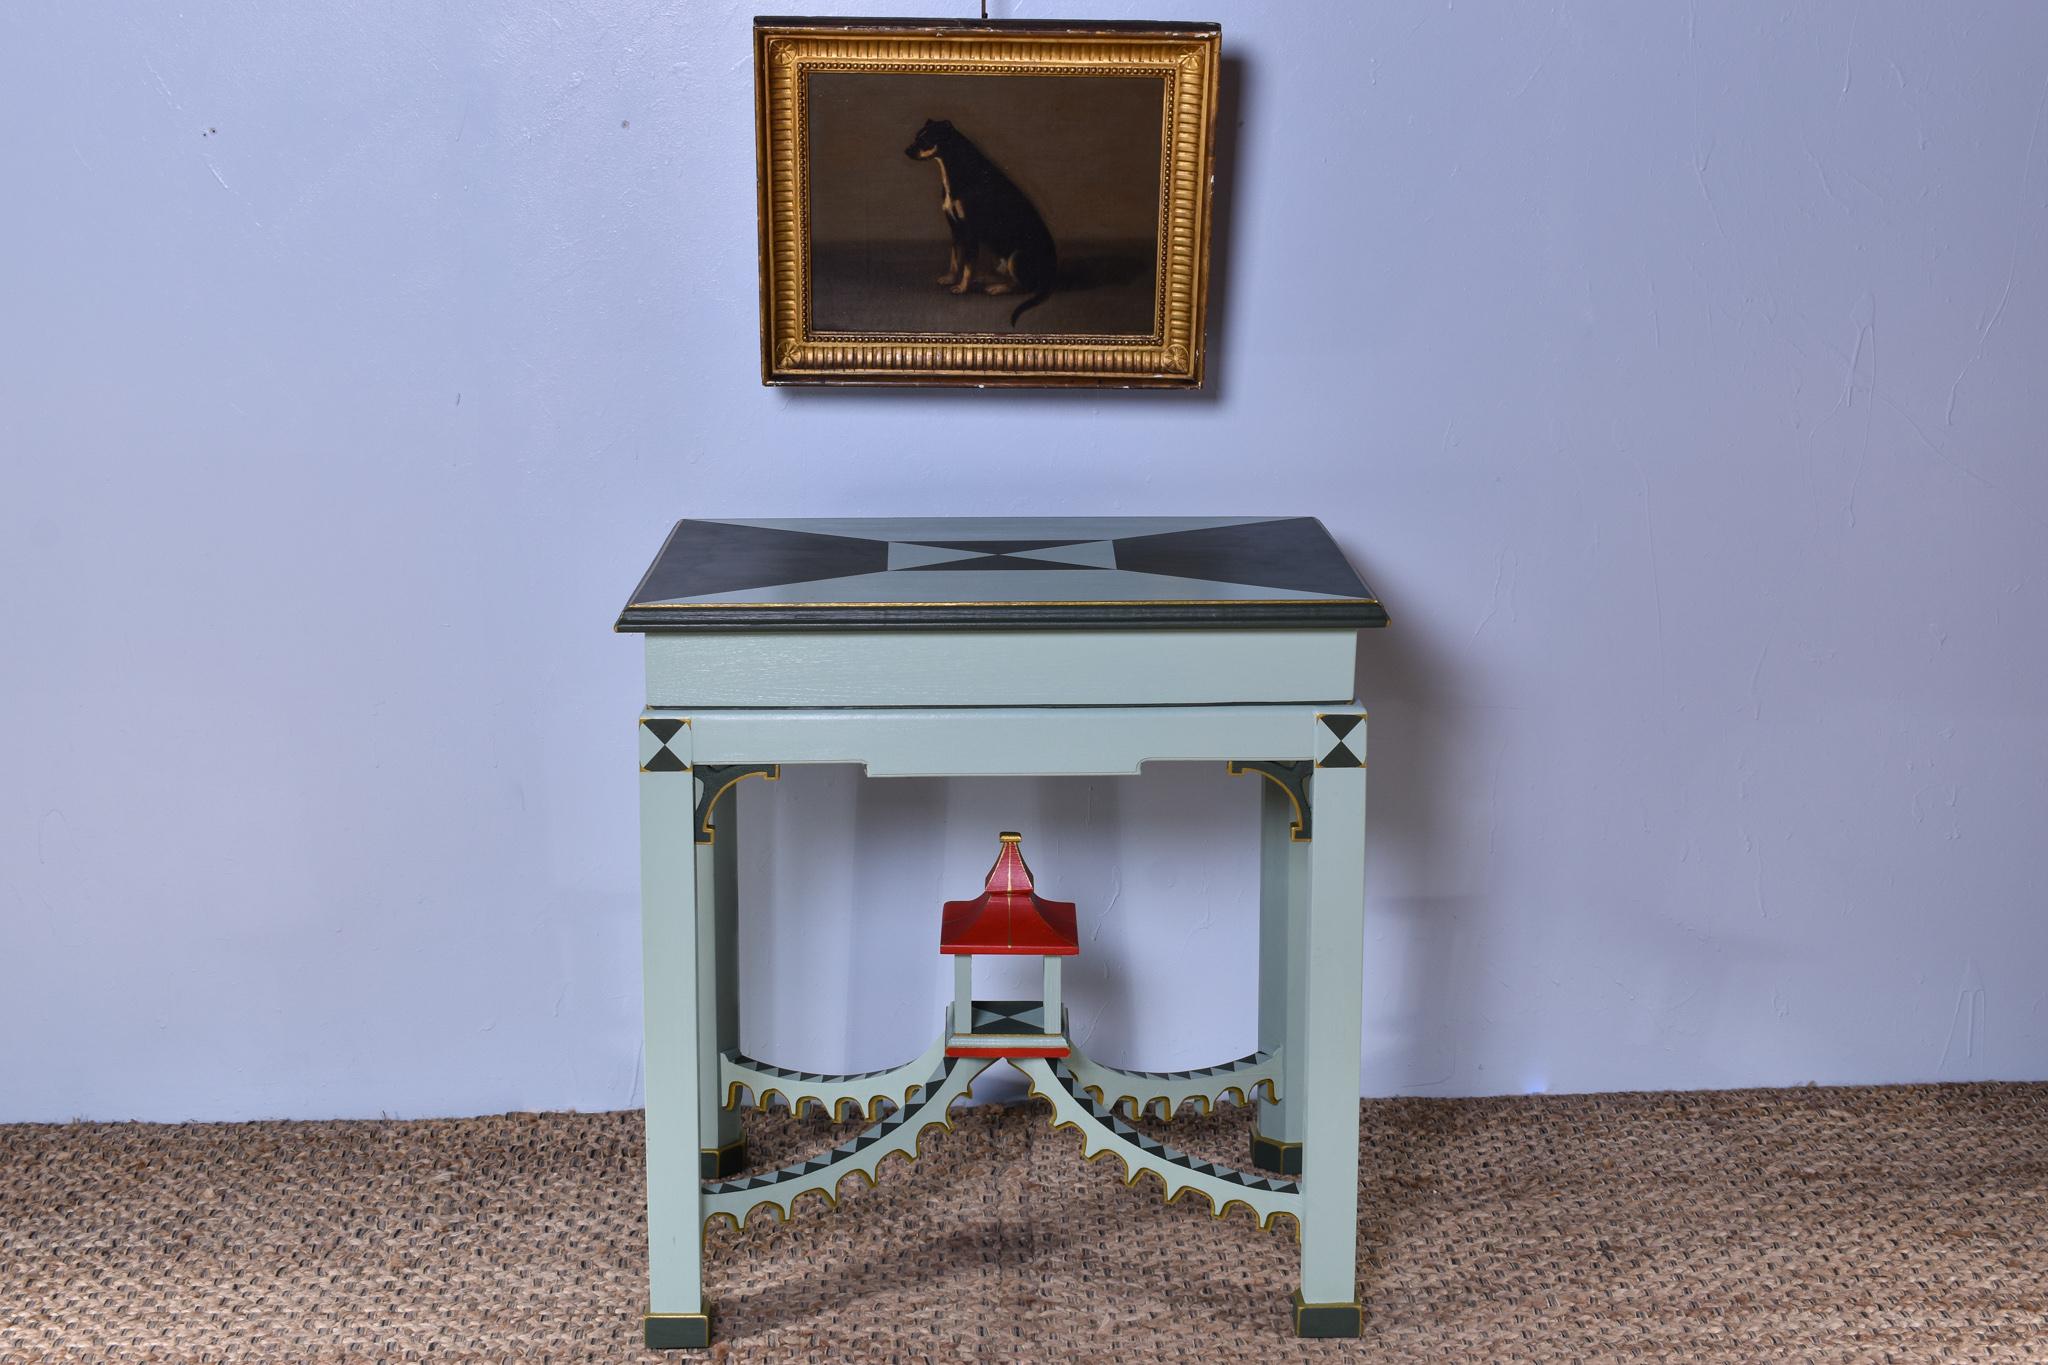 A wonderful bespoke side table featuring a sculpted pagoda with four adjoining stretchers, handcrafted by a master cabinet maker in North Yorkshire.

This table is made from solid North American tulip wood and hand-painted in our chosen colour way